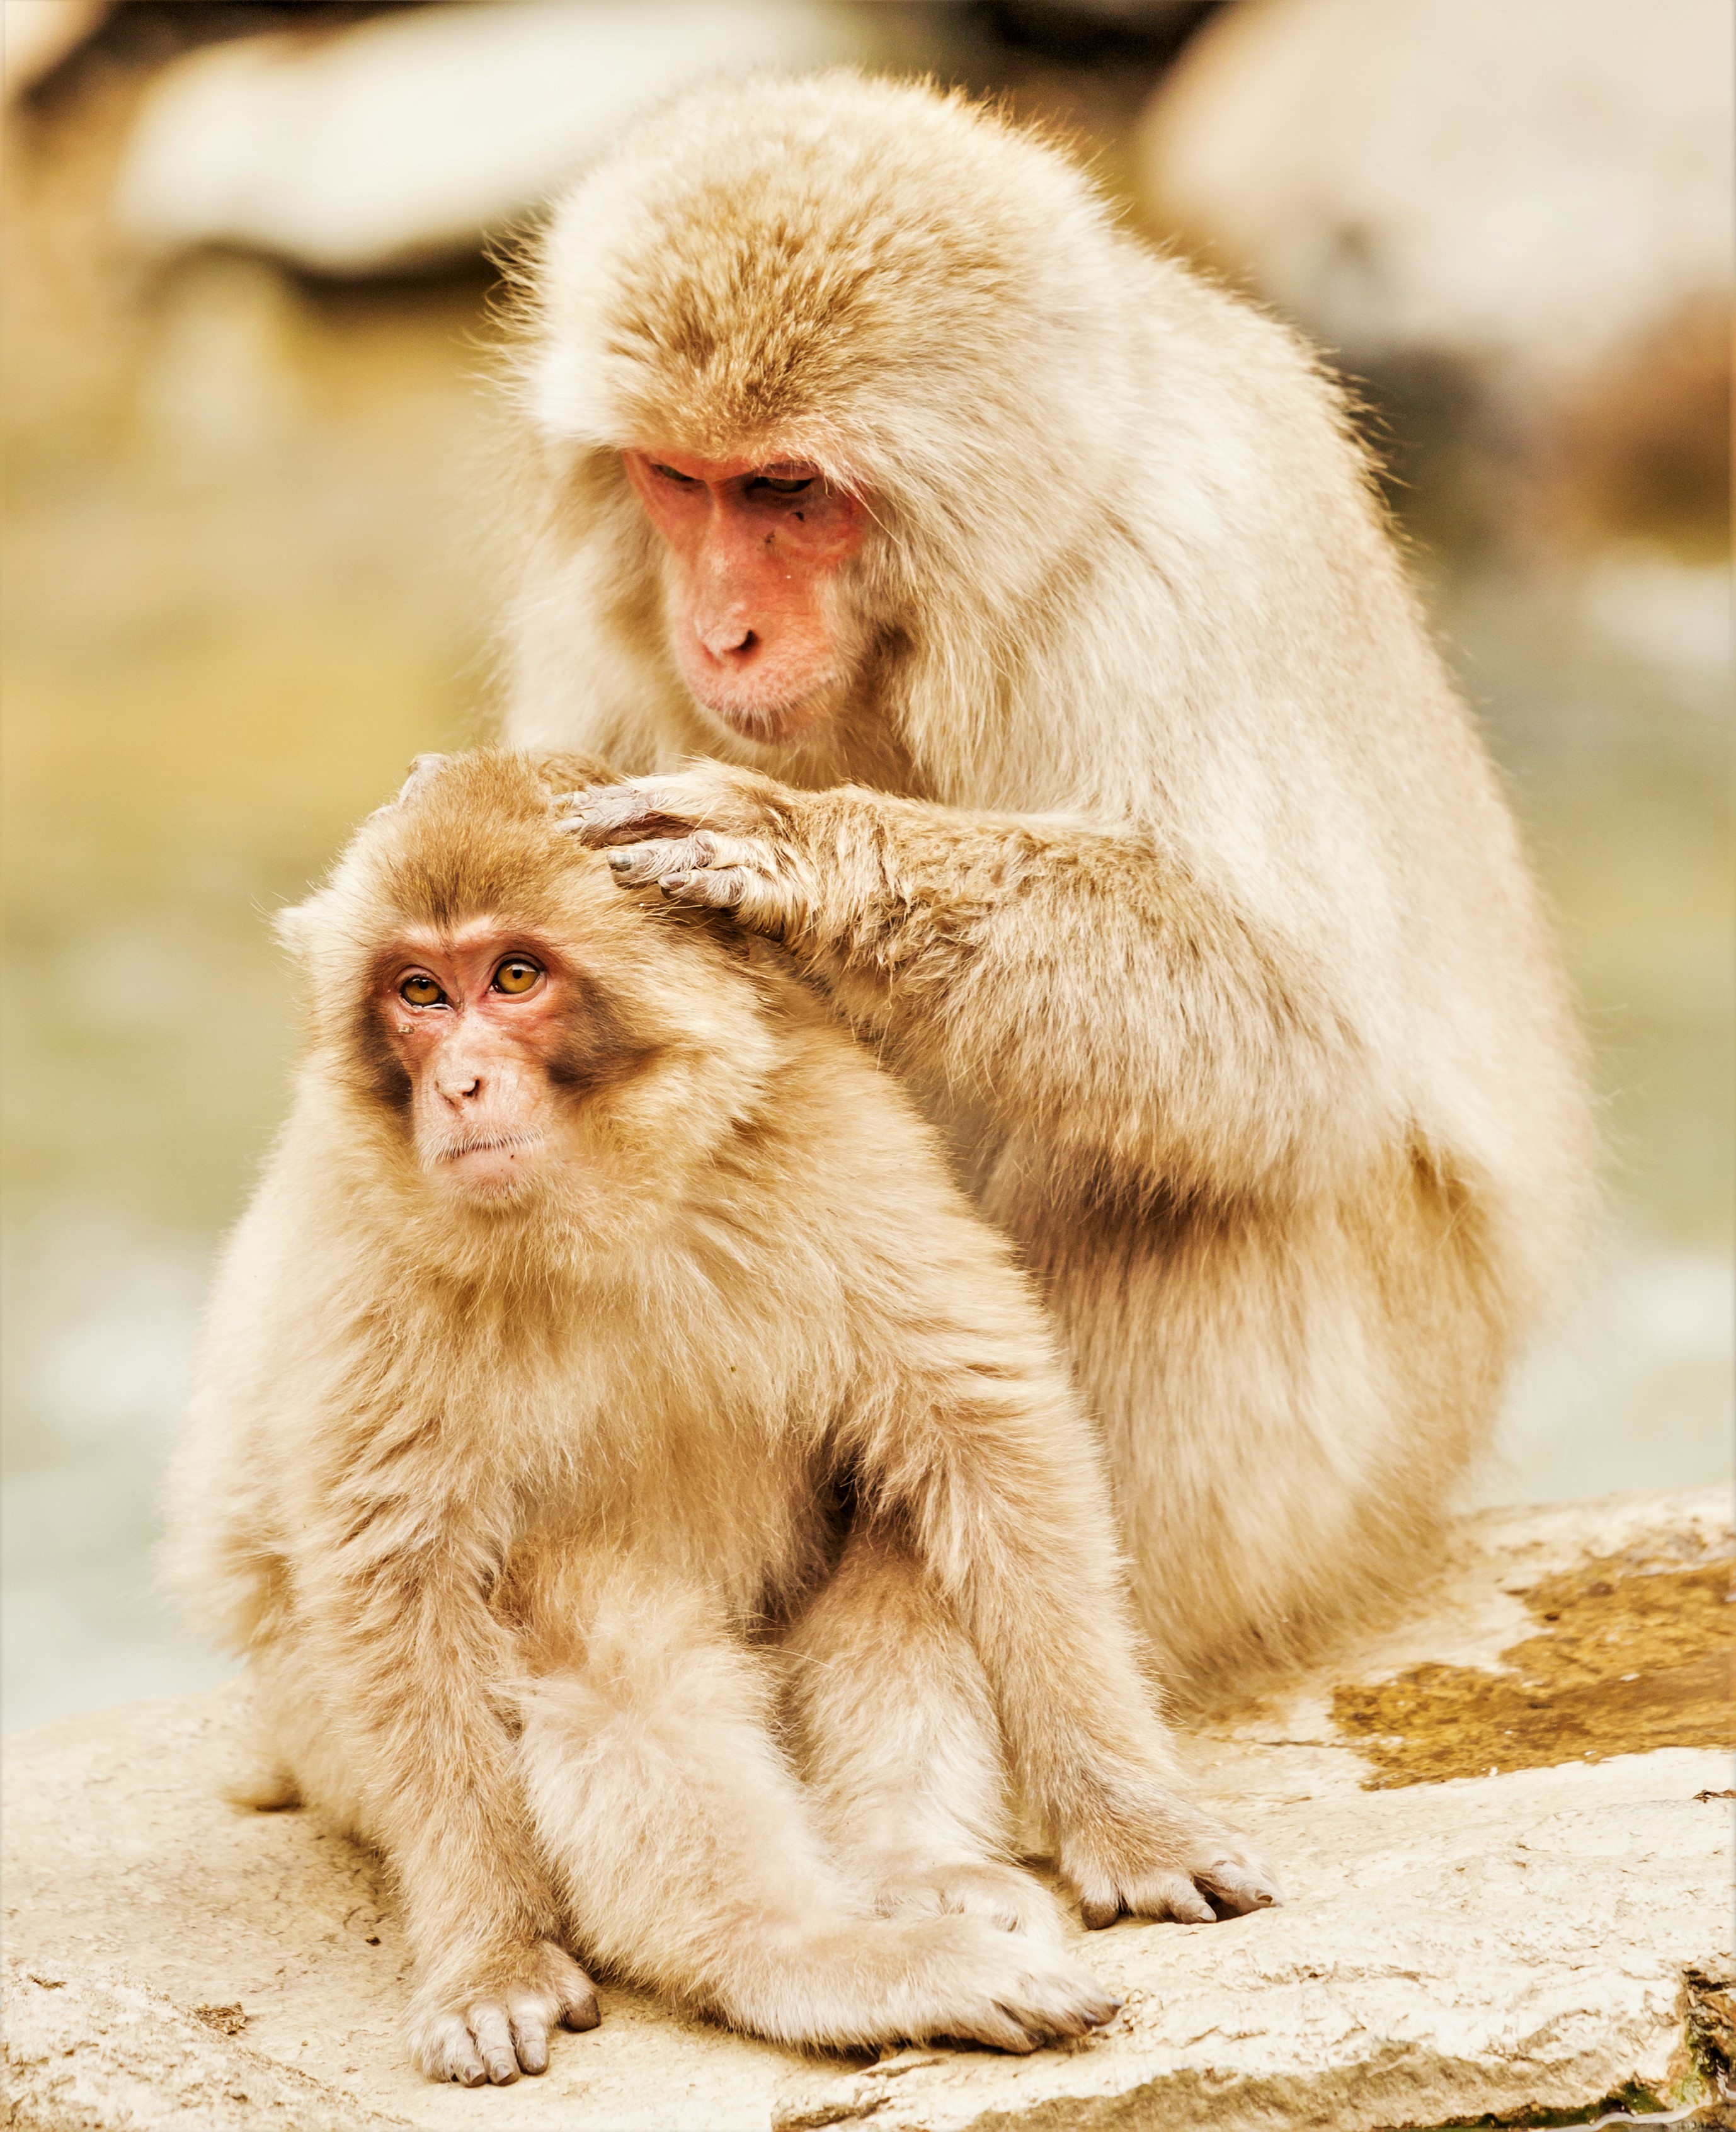 Mother japanese macaque taking care of her baby